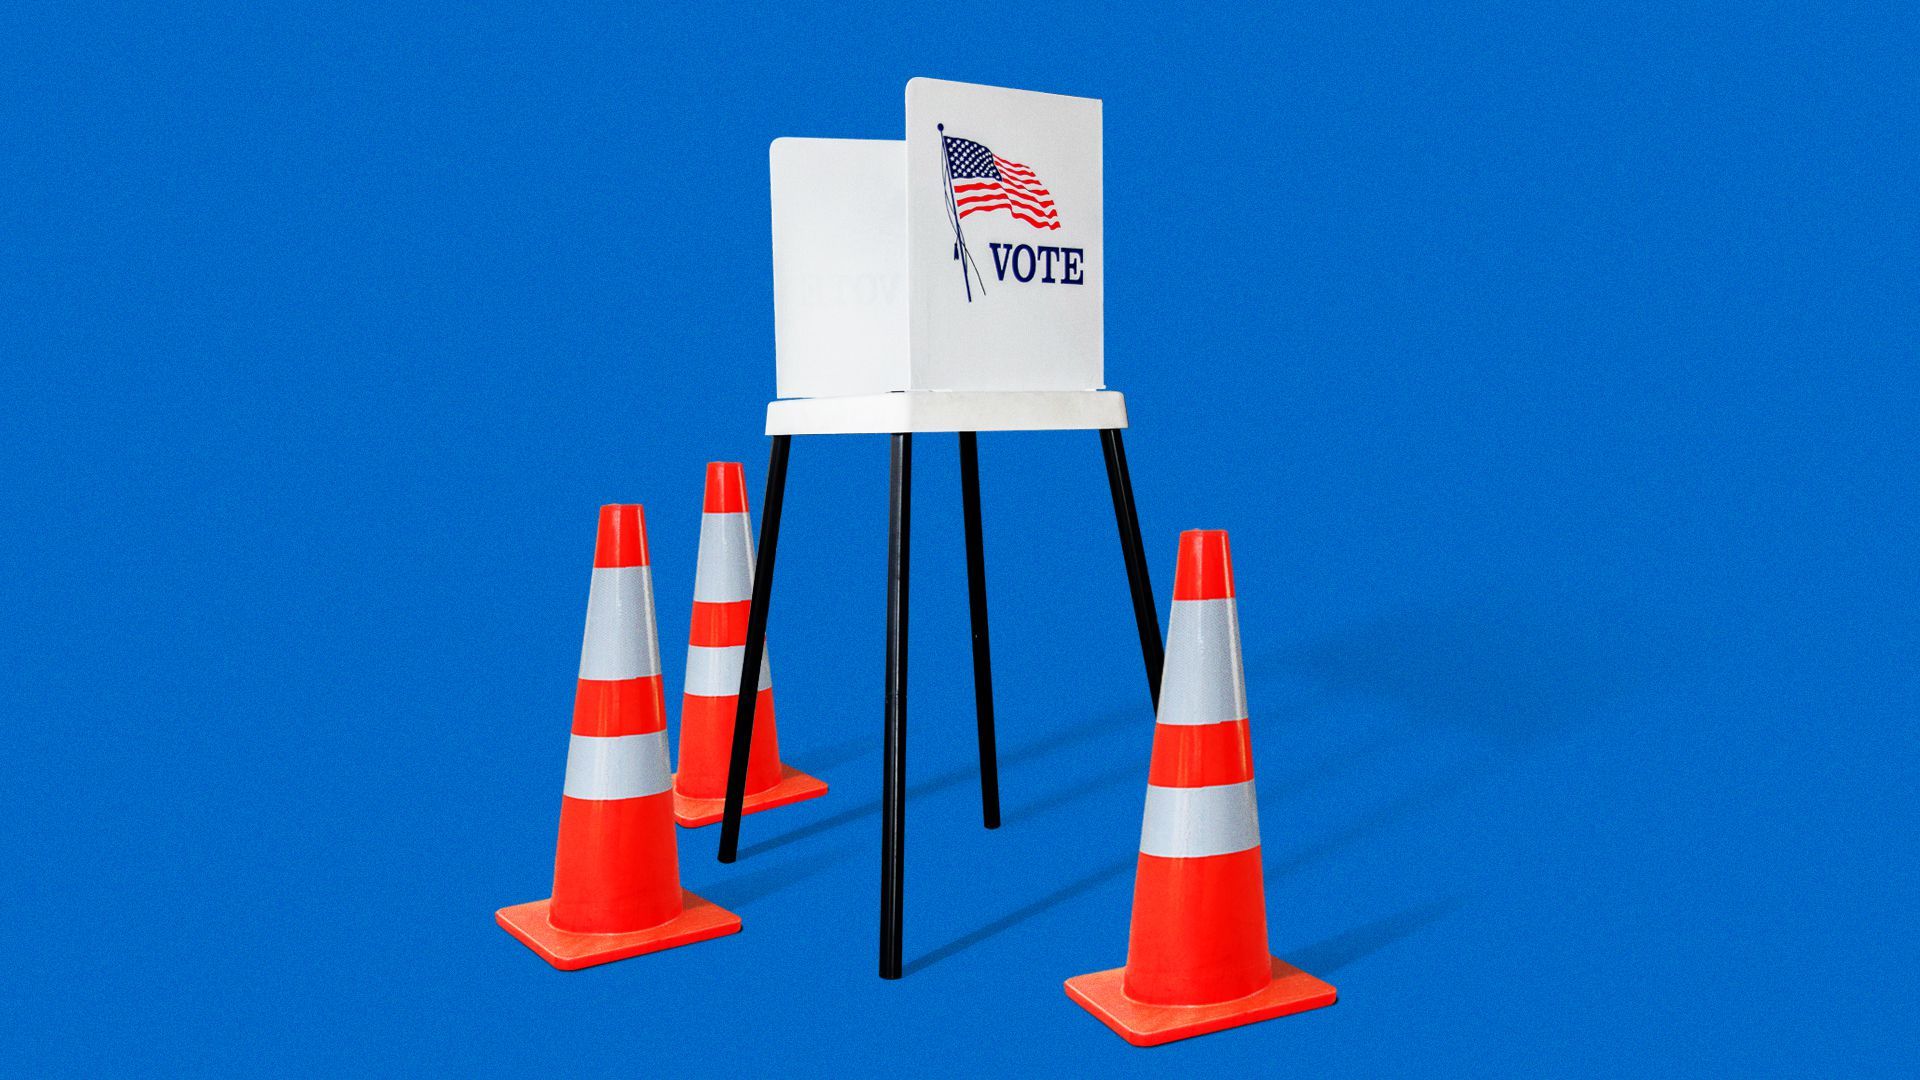 Voting booth on a blue background surrounded by safety cones.